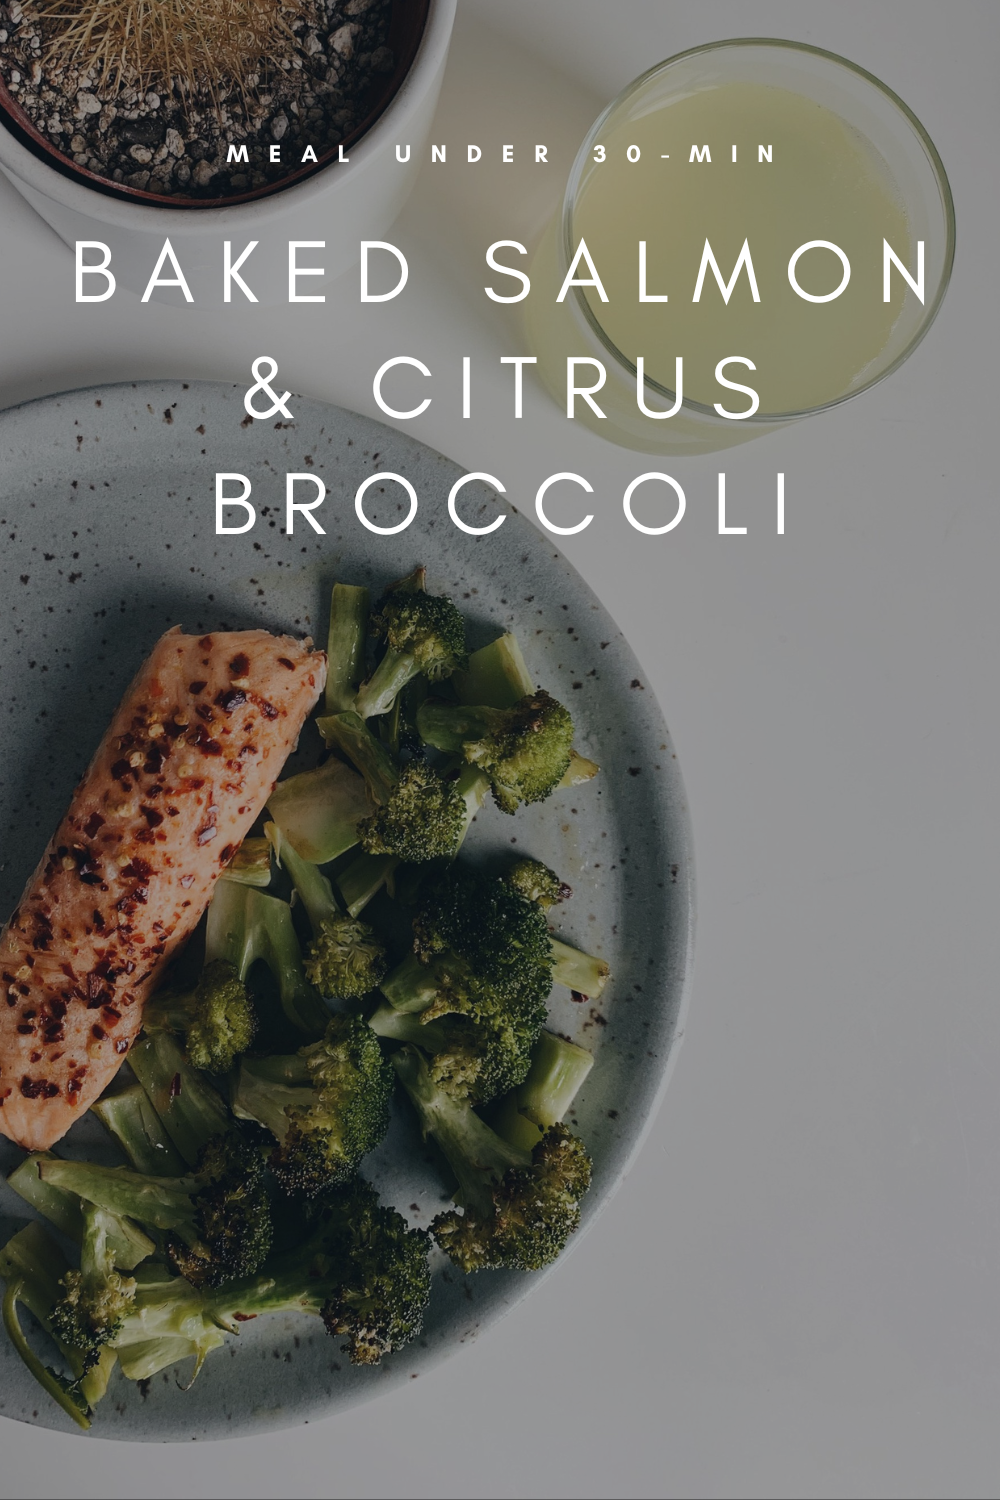 Baked Salmon & Citrus Broccoli Under 30 Minutes 1.png